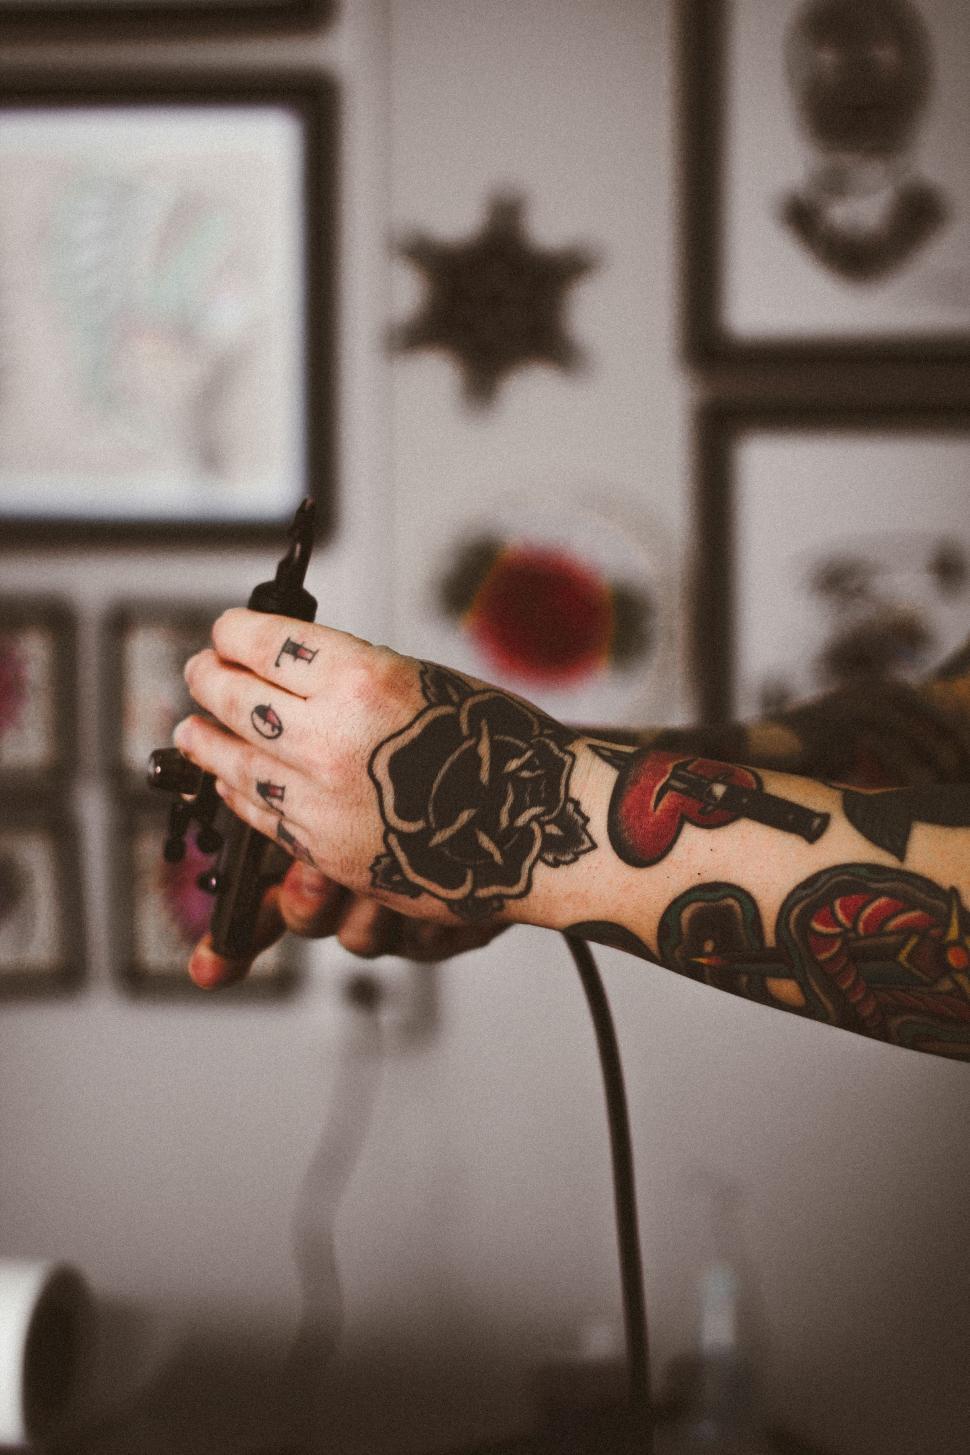 Free Image of Person With Tattoo Holding Hair Dryer 